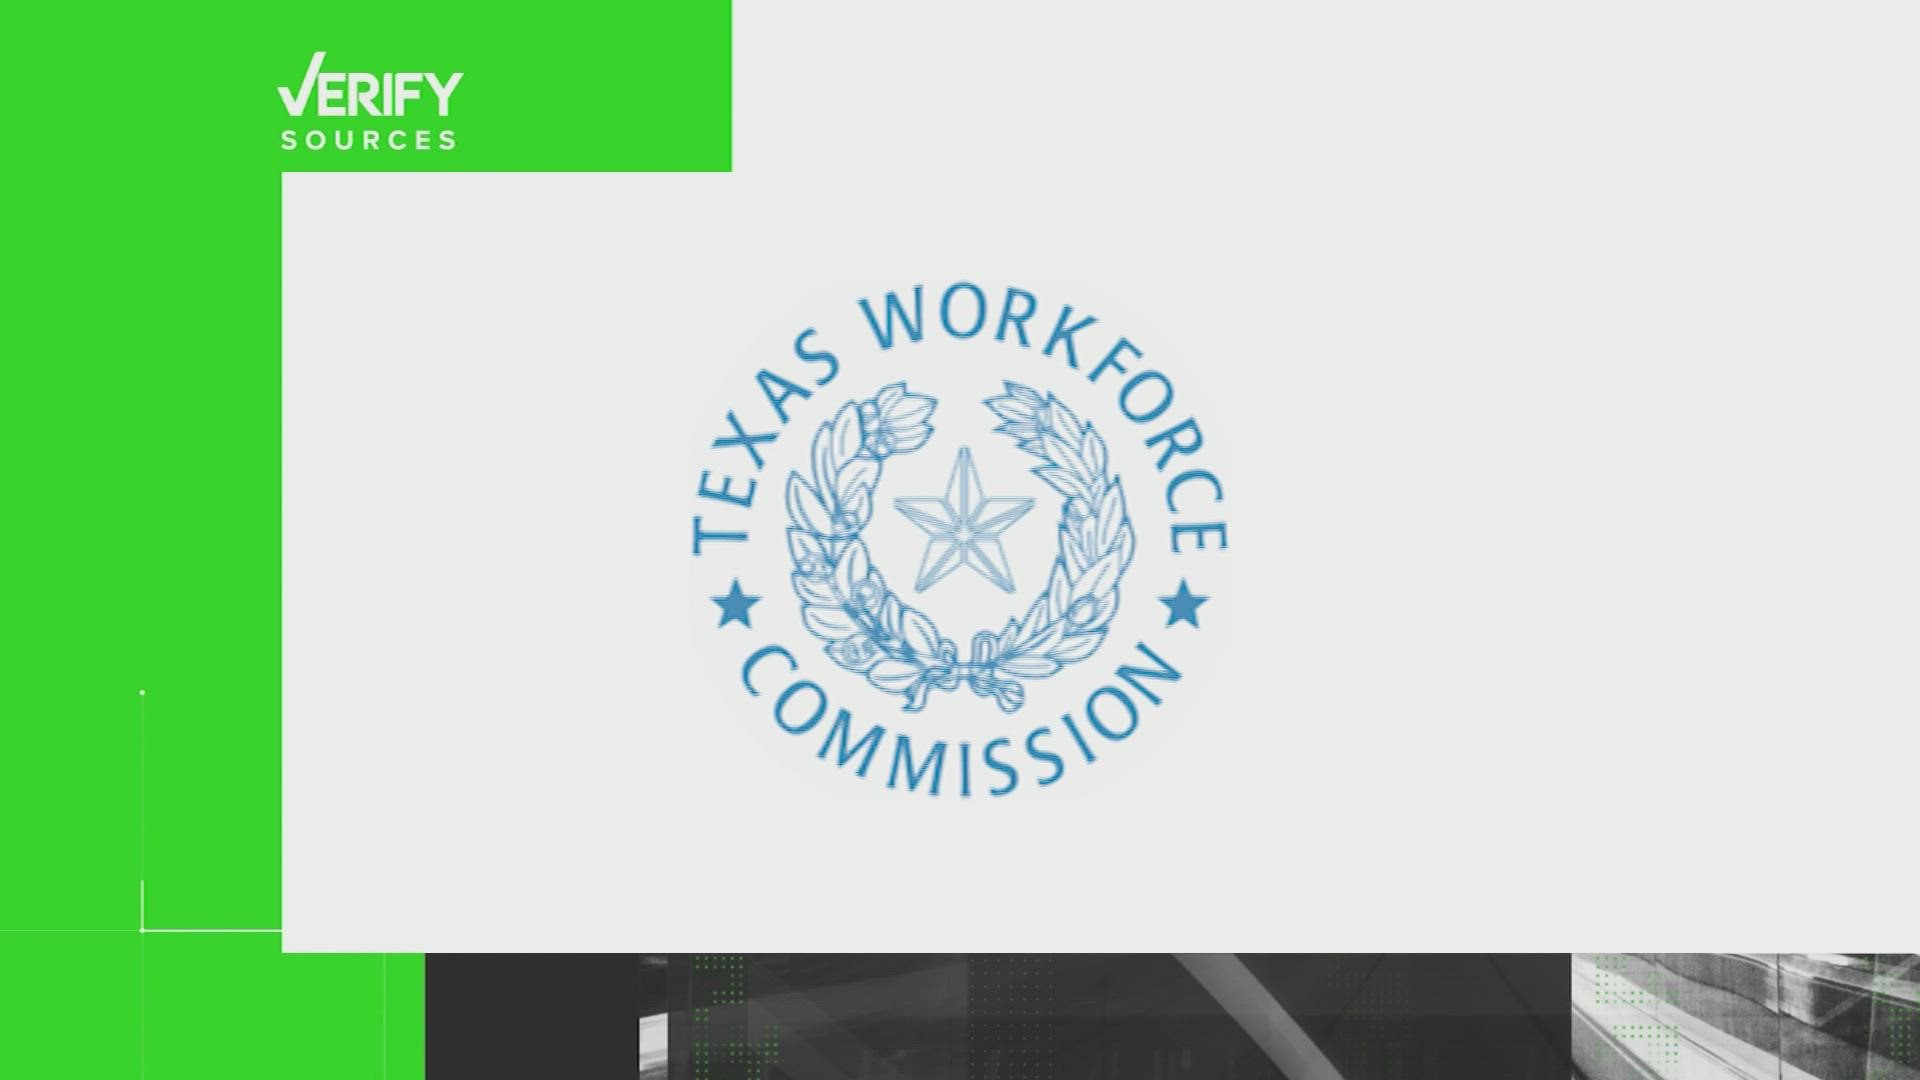 A viewer asked if she could collect unemployment if she misses work because of COVID-19 so we checked with the Texas Workforce Commission.